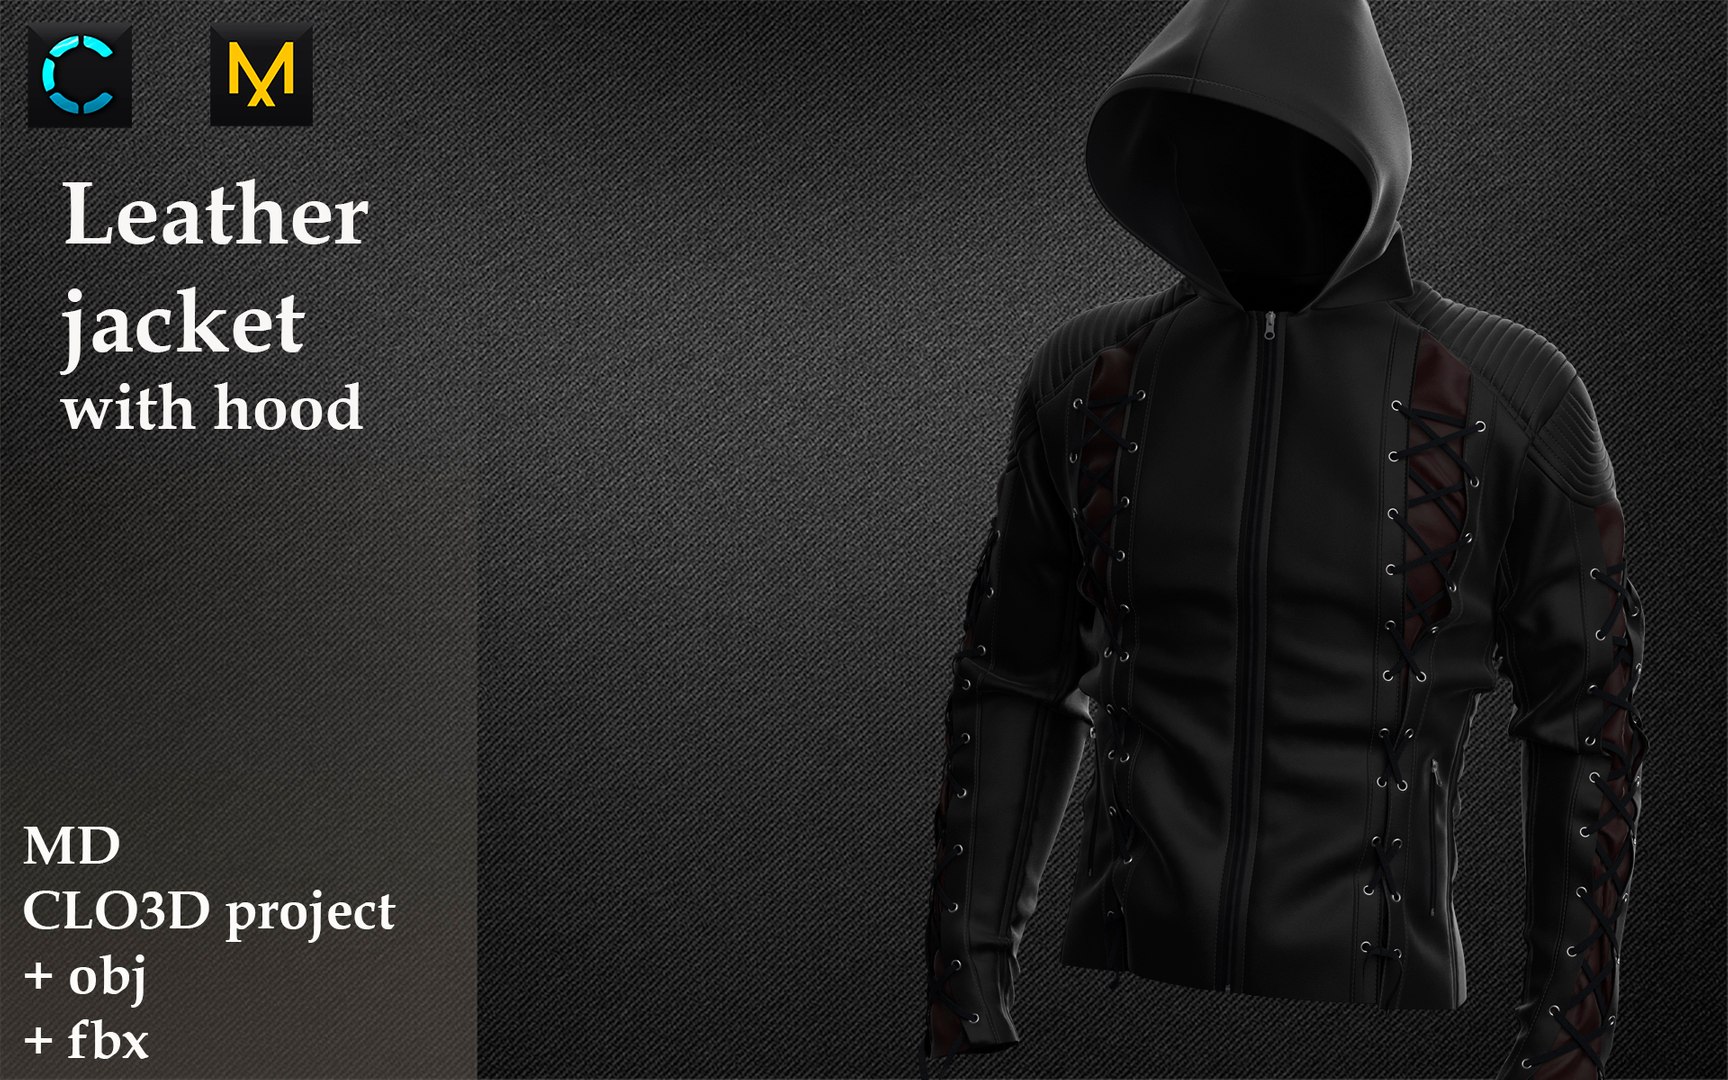 3D Leather Jacket with hood model - TurboSquid 2067791